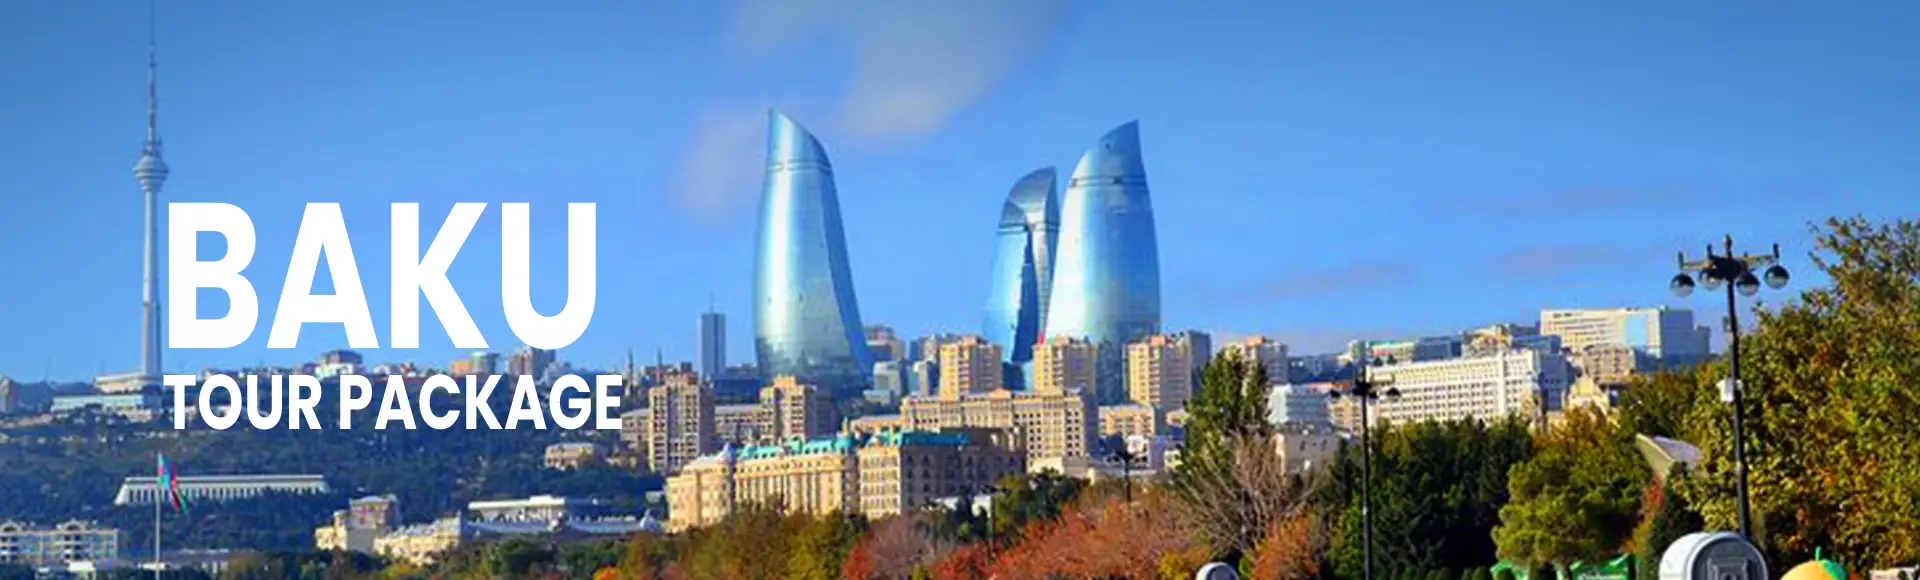 Baku tours holiday packages